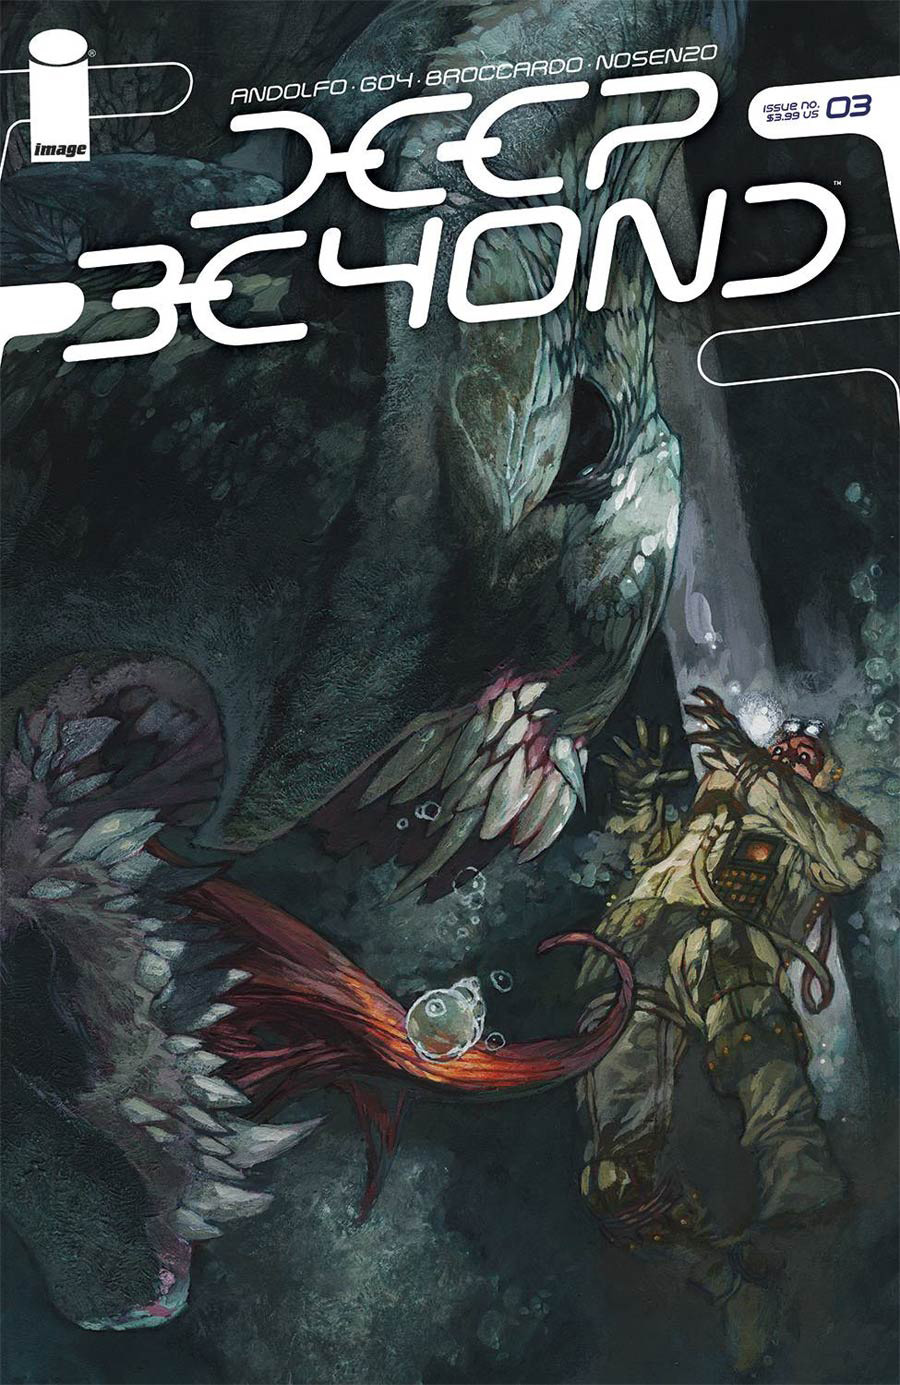 Deep Beyond #3 Cover D Variant Simone Bianchi Cover (Limit 1 Per Customer)